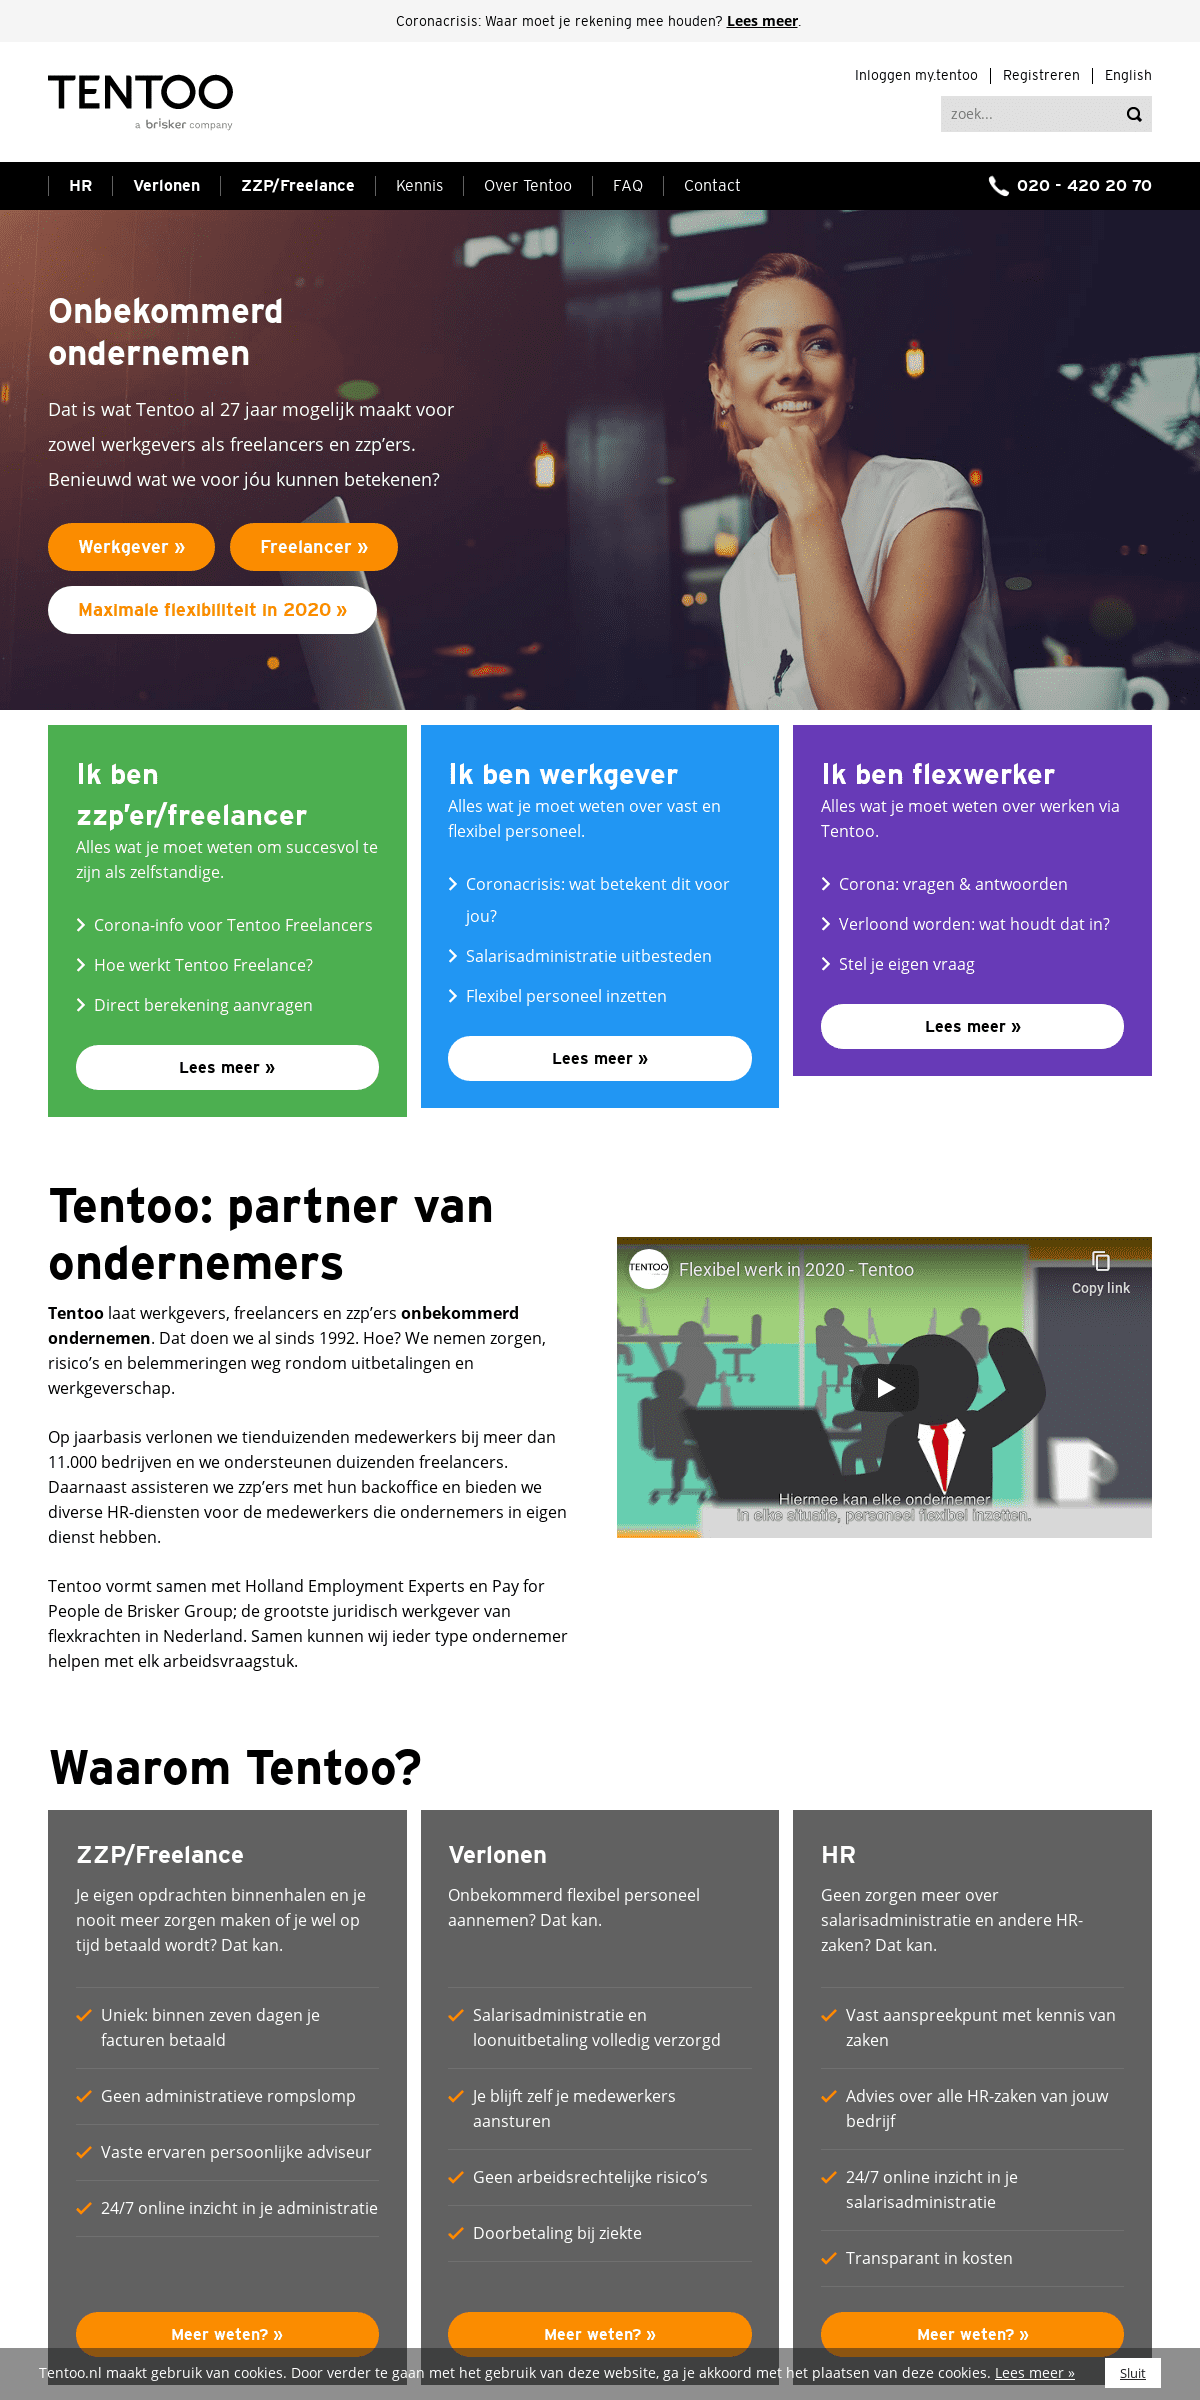 A complete backup of tentoo.nl